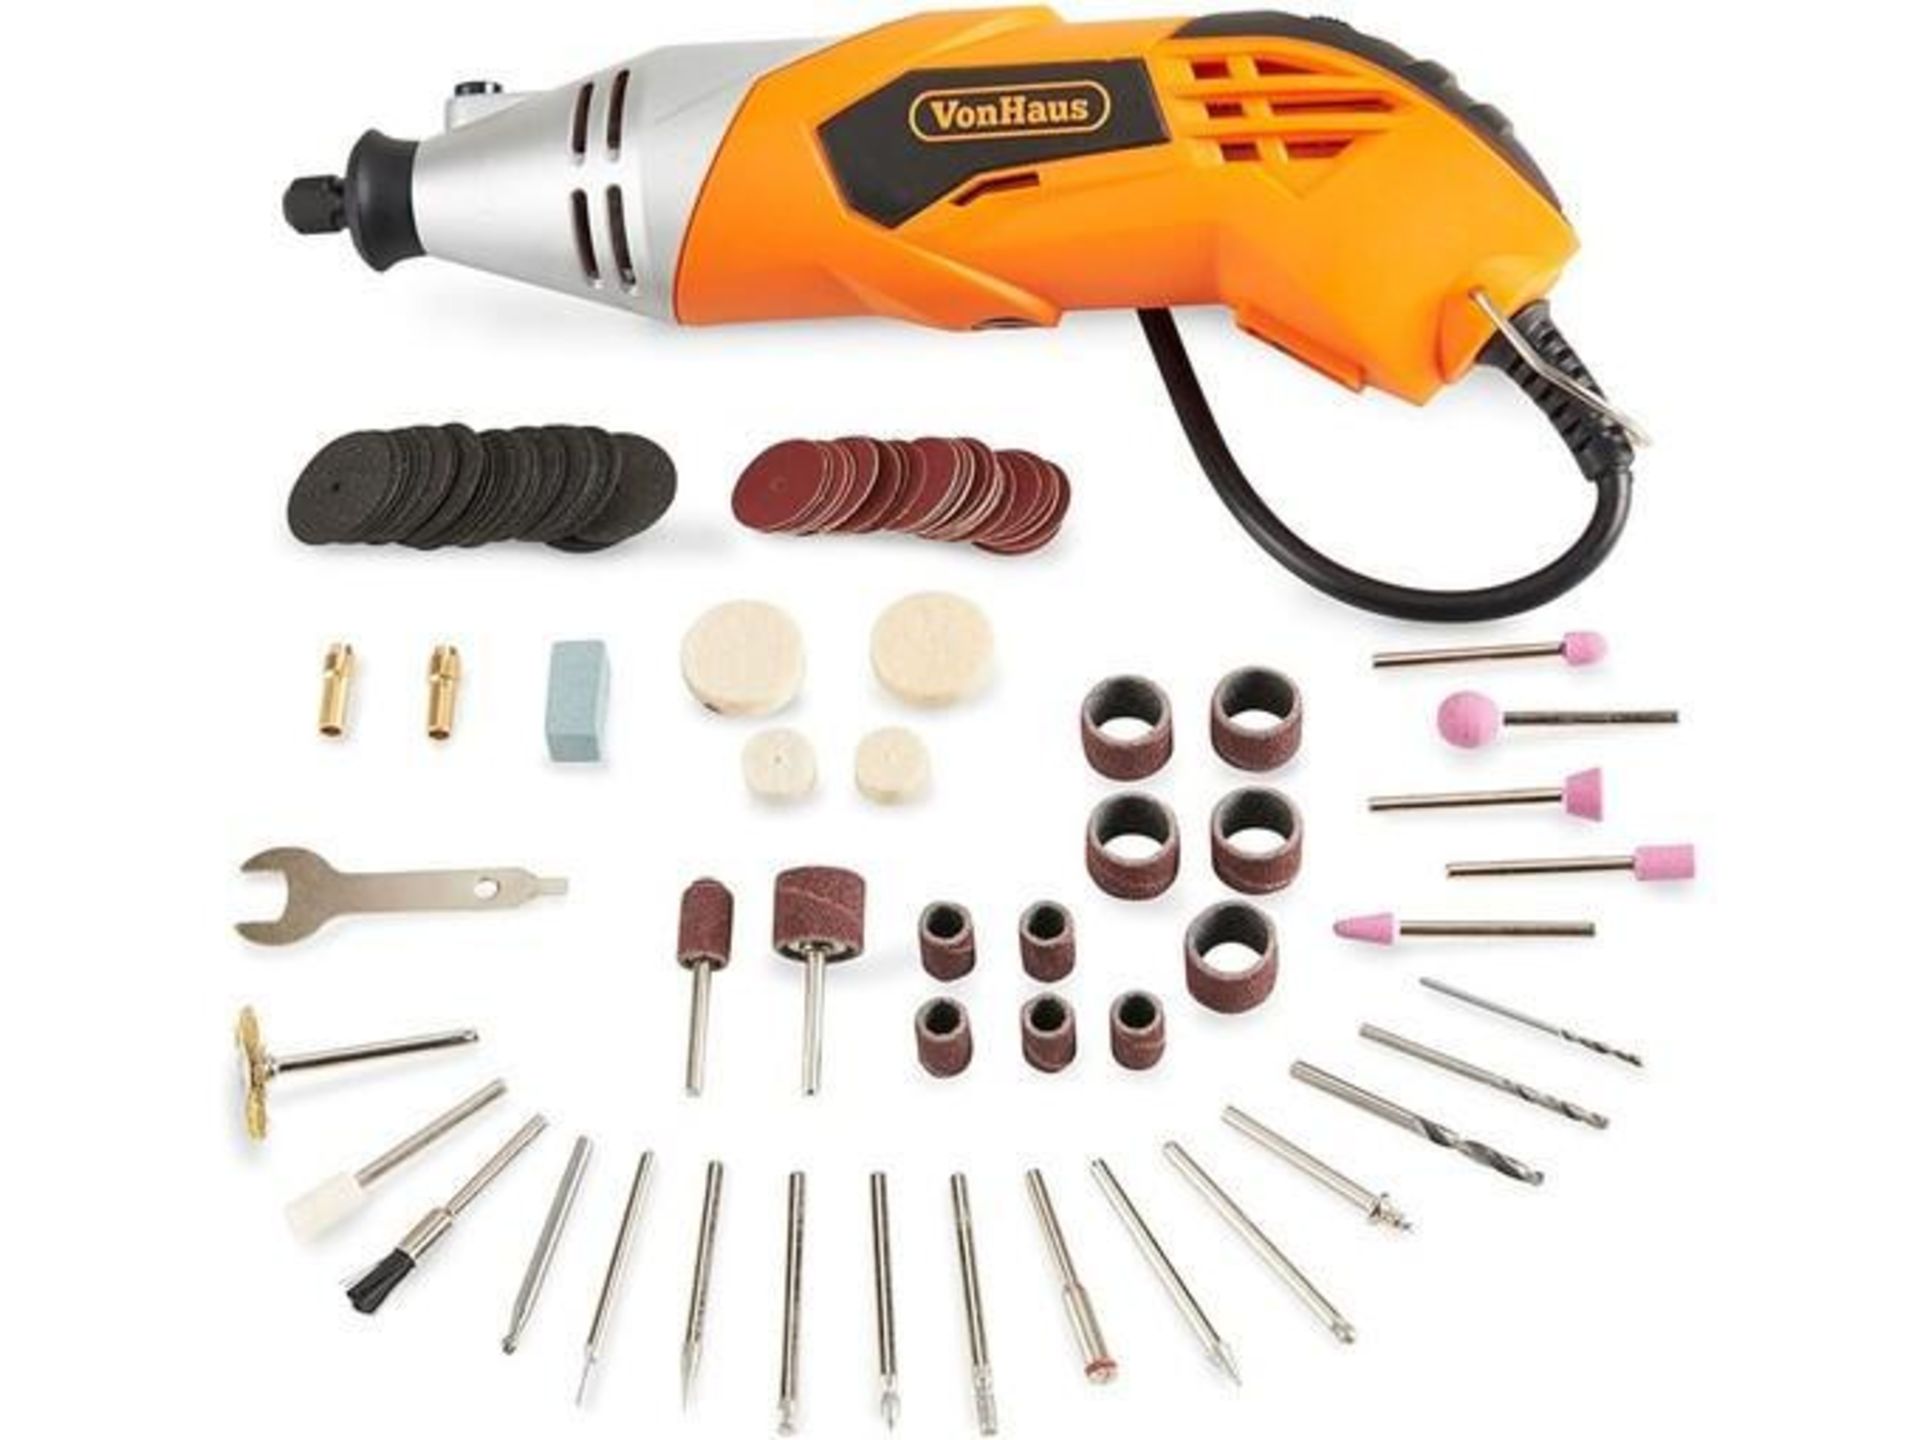 Rotary Multitool & Accessory Set (ER32) Ideal for a wide range of DIY, hobby, woodwork, jewellery